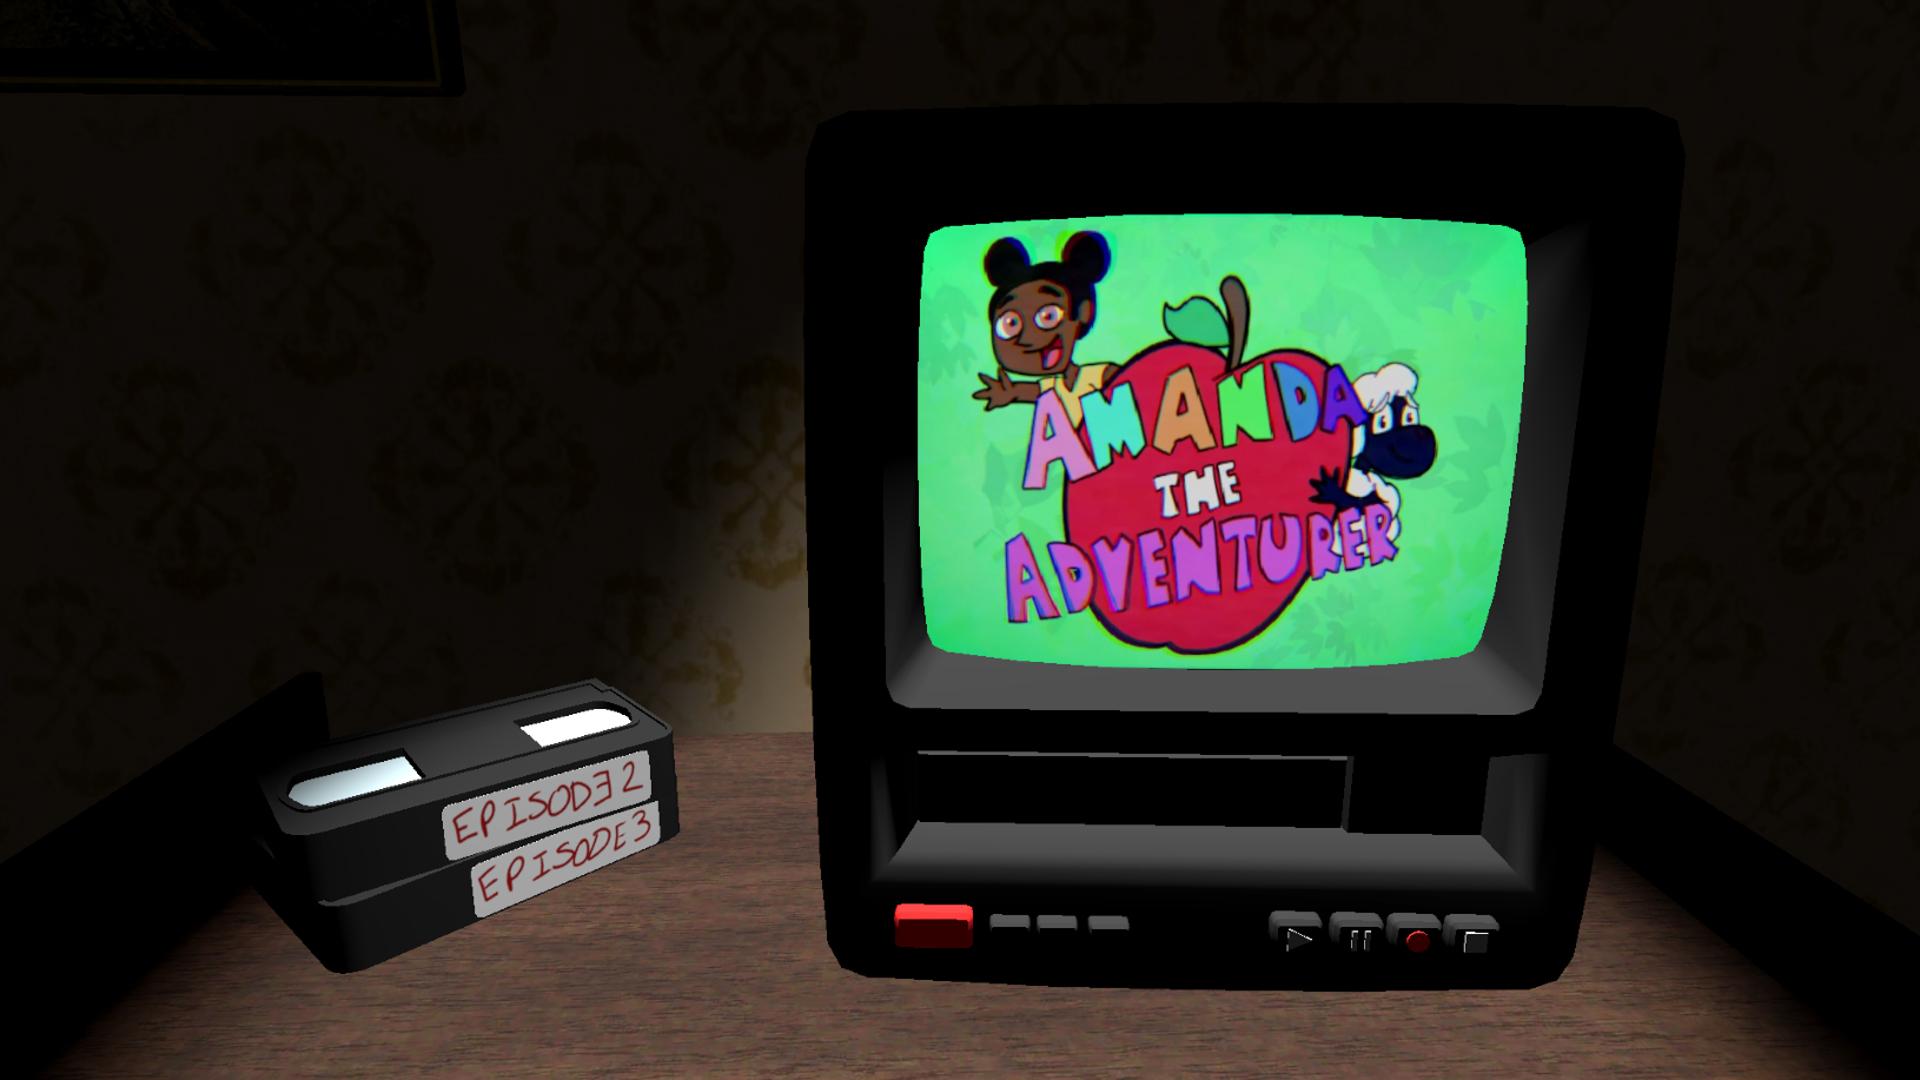 Download Amanda Adventurer Game android on PC